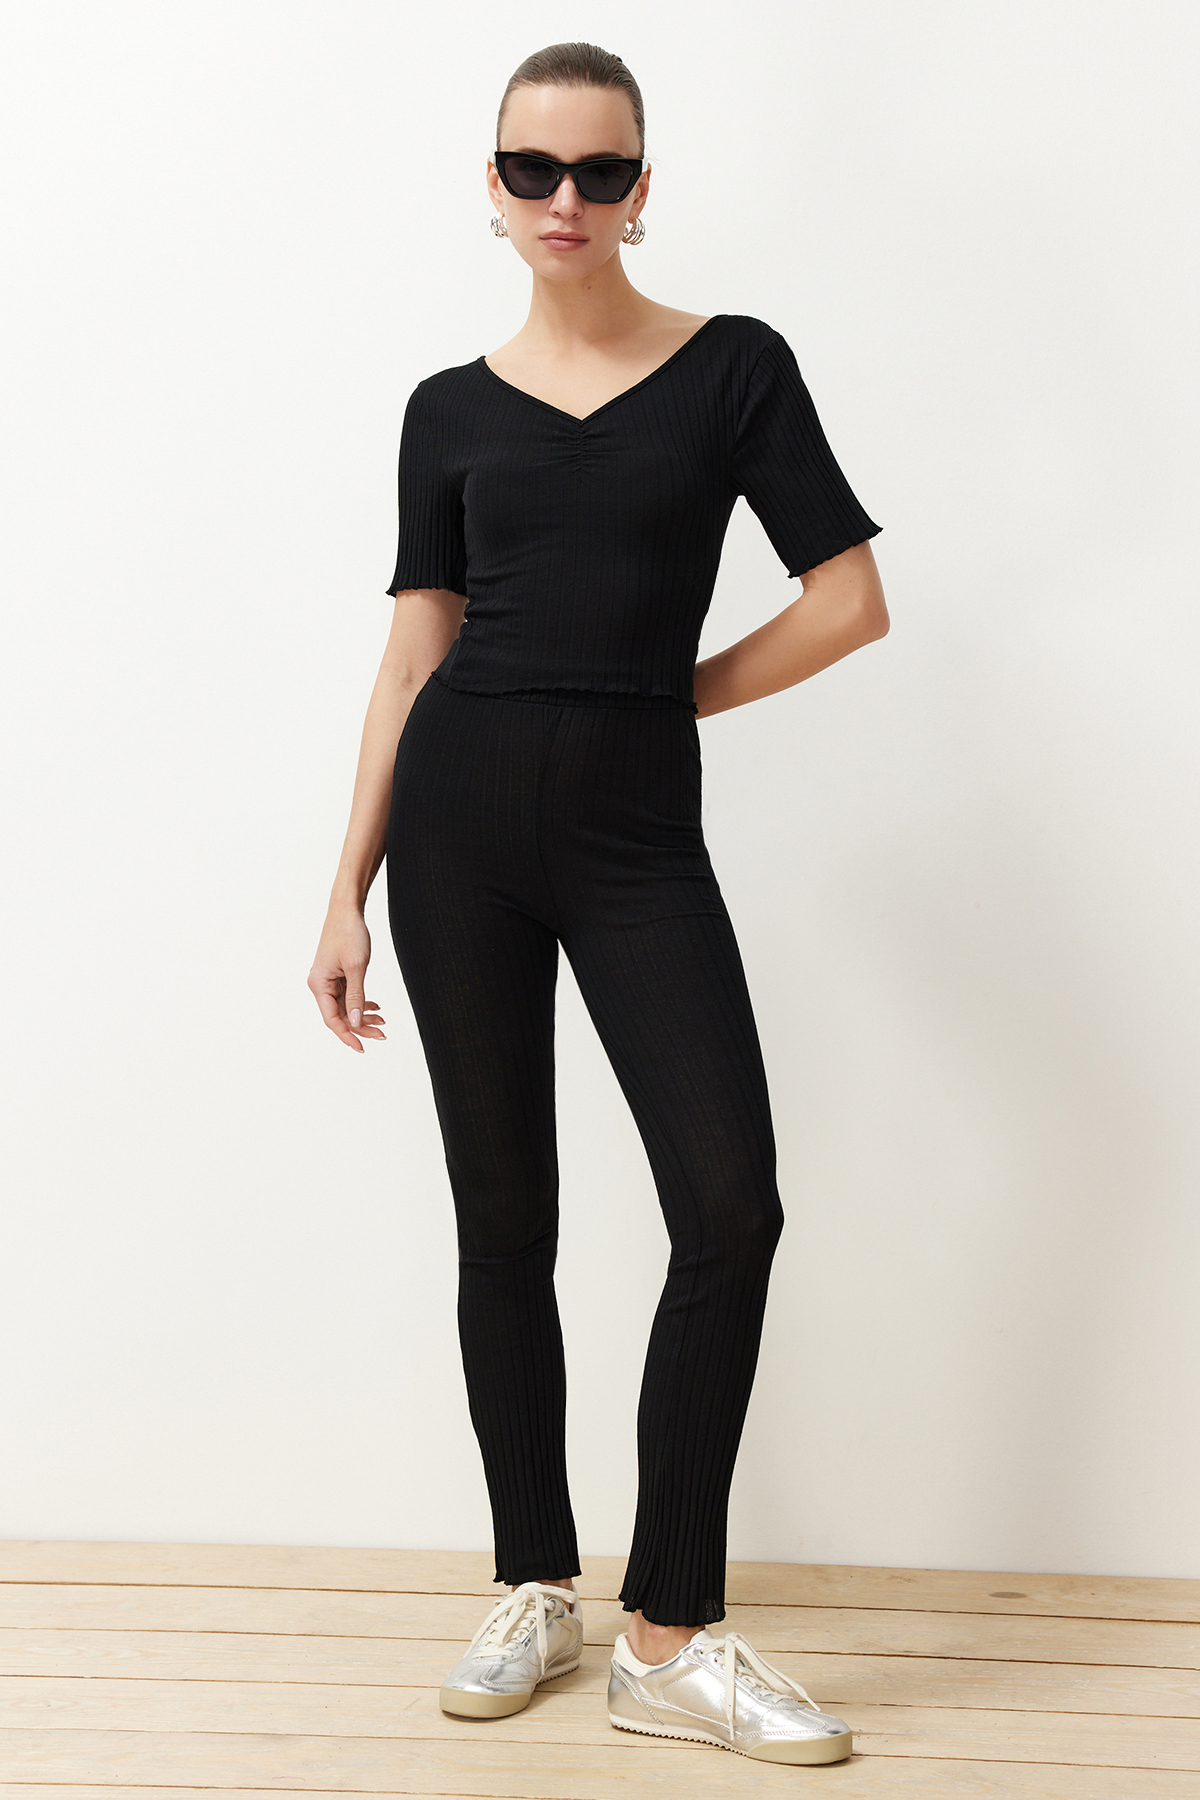 Trendyol Black V-Neck Gather Detailed Ribbed Stretchy Knitted Blouse and Trousers Bottom-Top Set